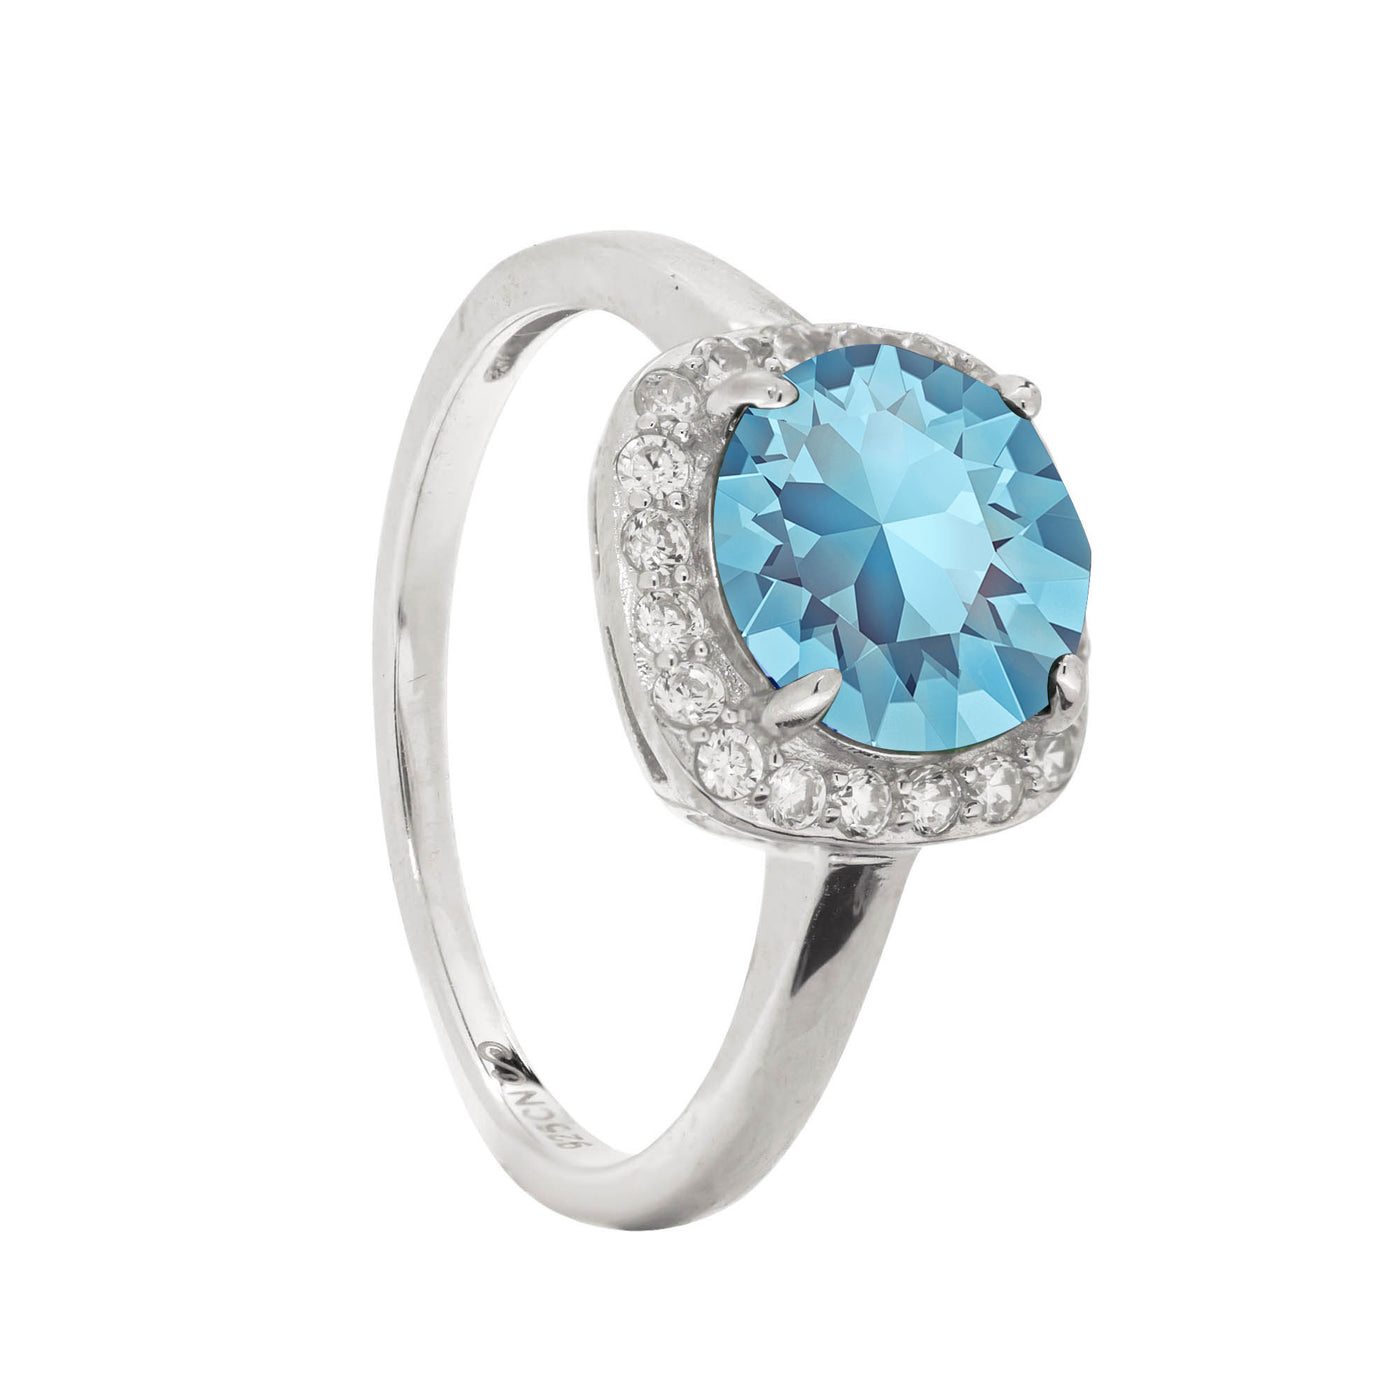 Rebecca Sloane Silver Pave Halo with Aqua Crystal Ring